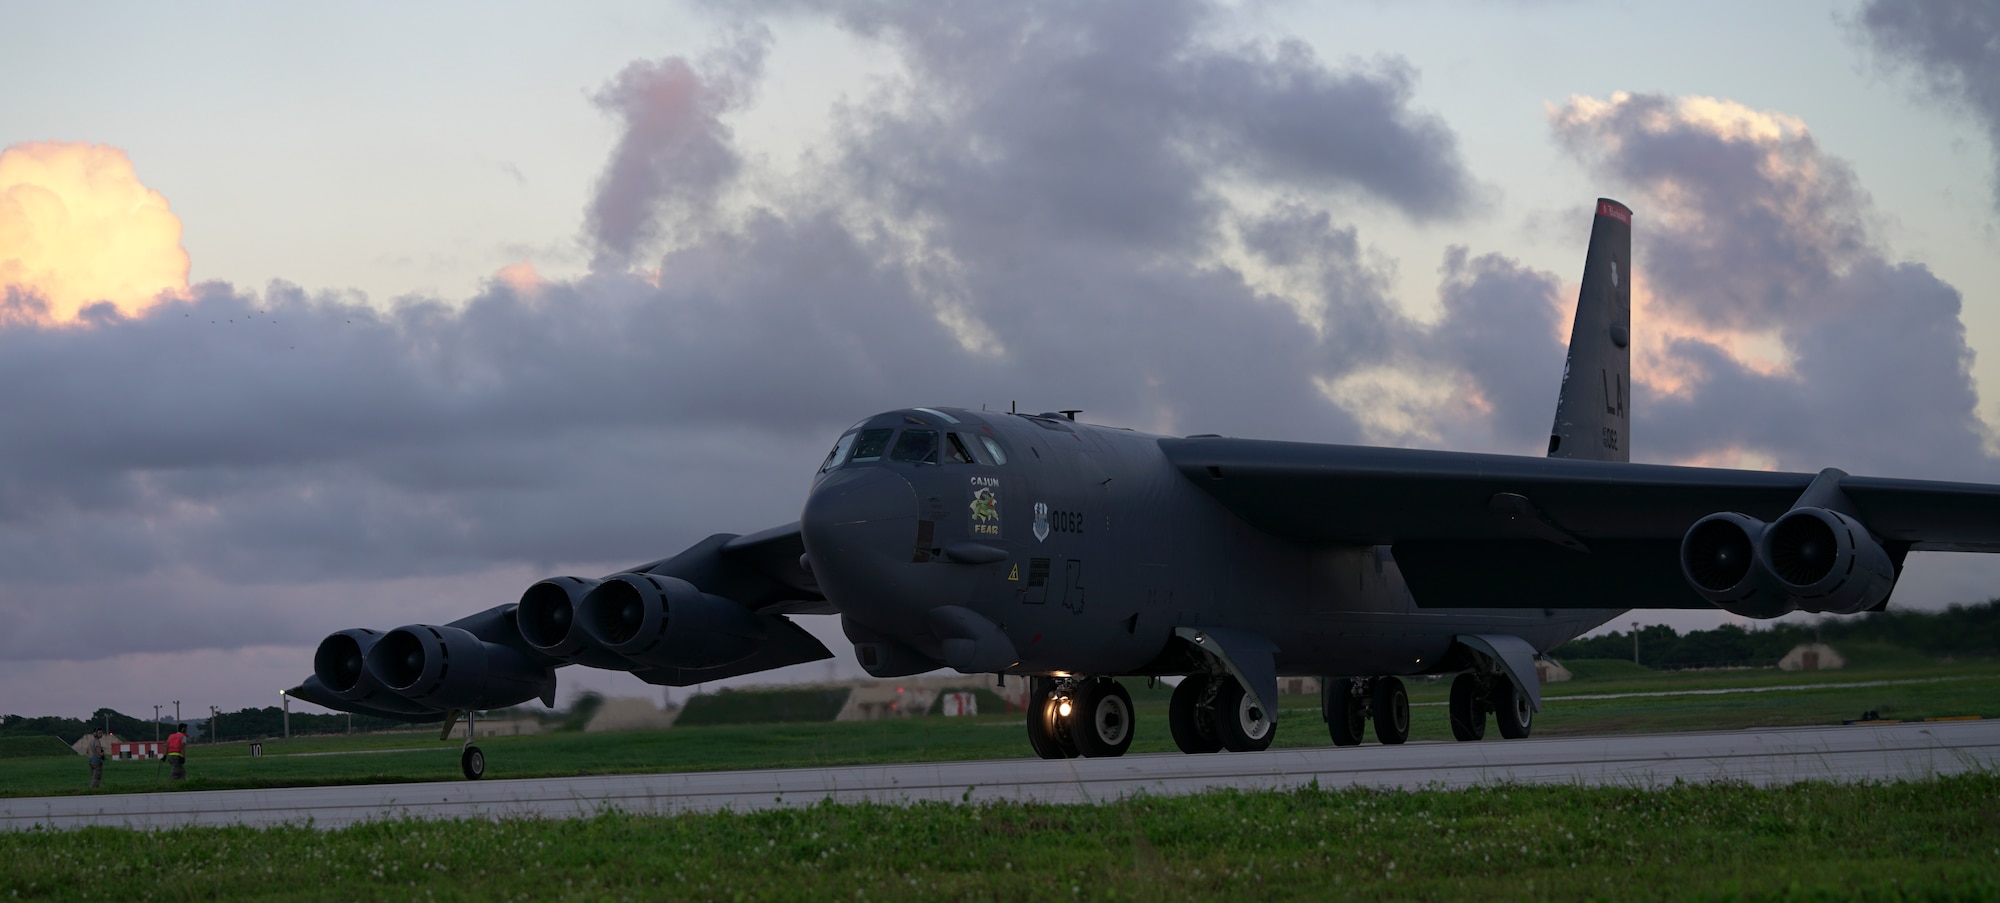 A U.S. Air Force B-52H Stratofortress bomber assigned to the 20th Expeditionary Bomb Squadron, deployed from Barksdale Air Force Base, La., prepares to takeoff from Andersen AFB, Guam, in support of a routine Continuous Bomber Presence (CBP) mission over south-east Queensland, Australia, June 19, 2018 (HST).